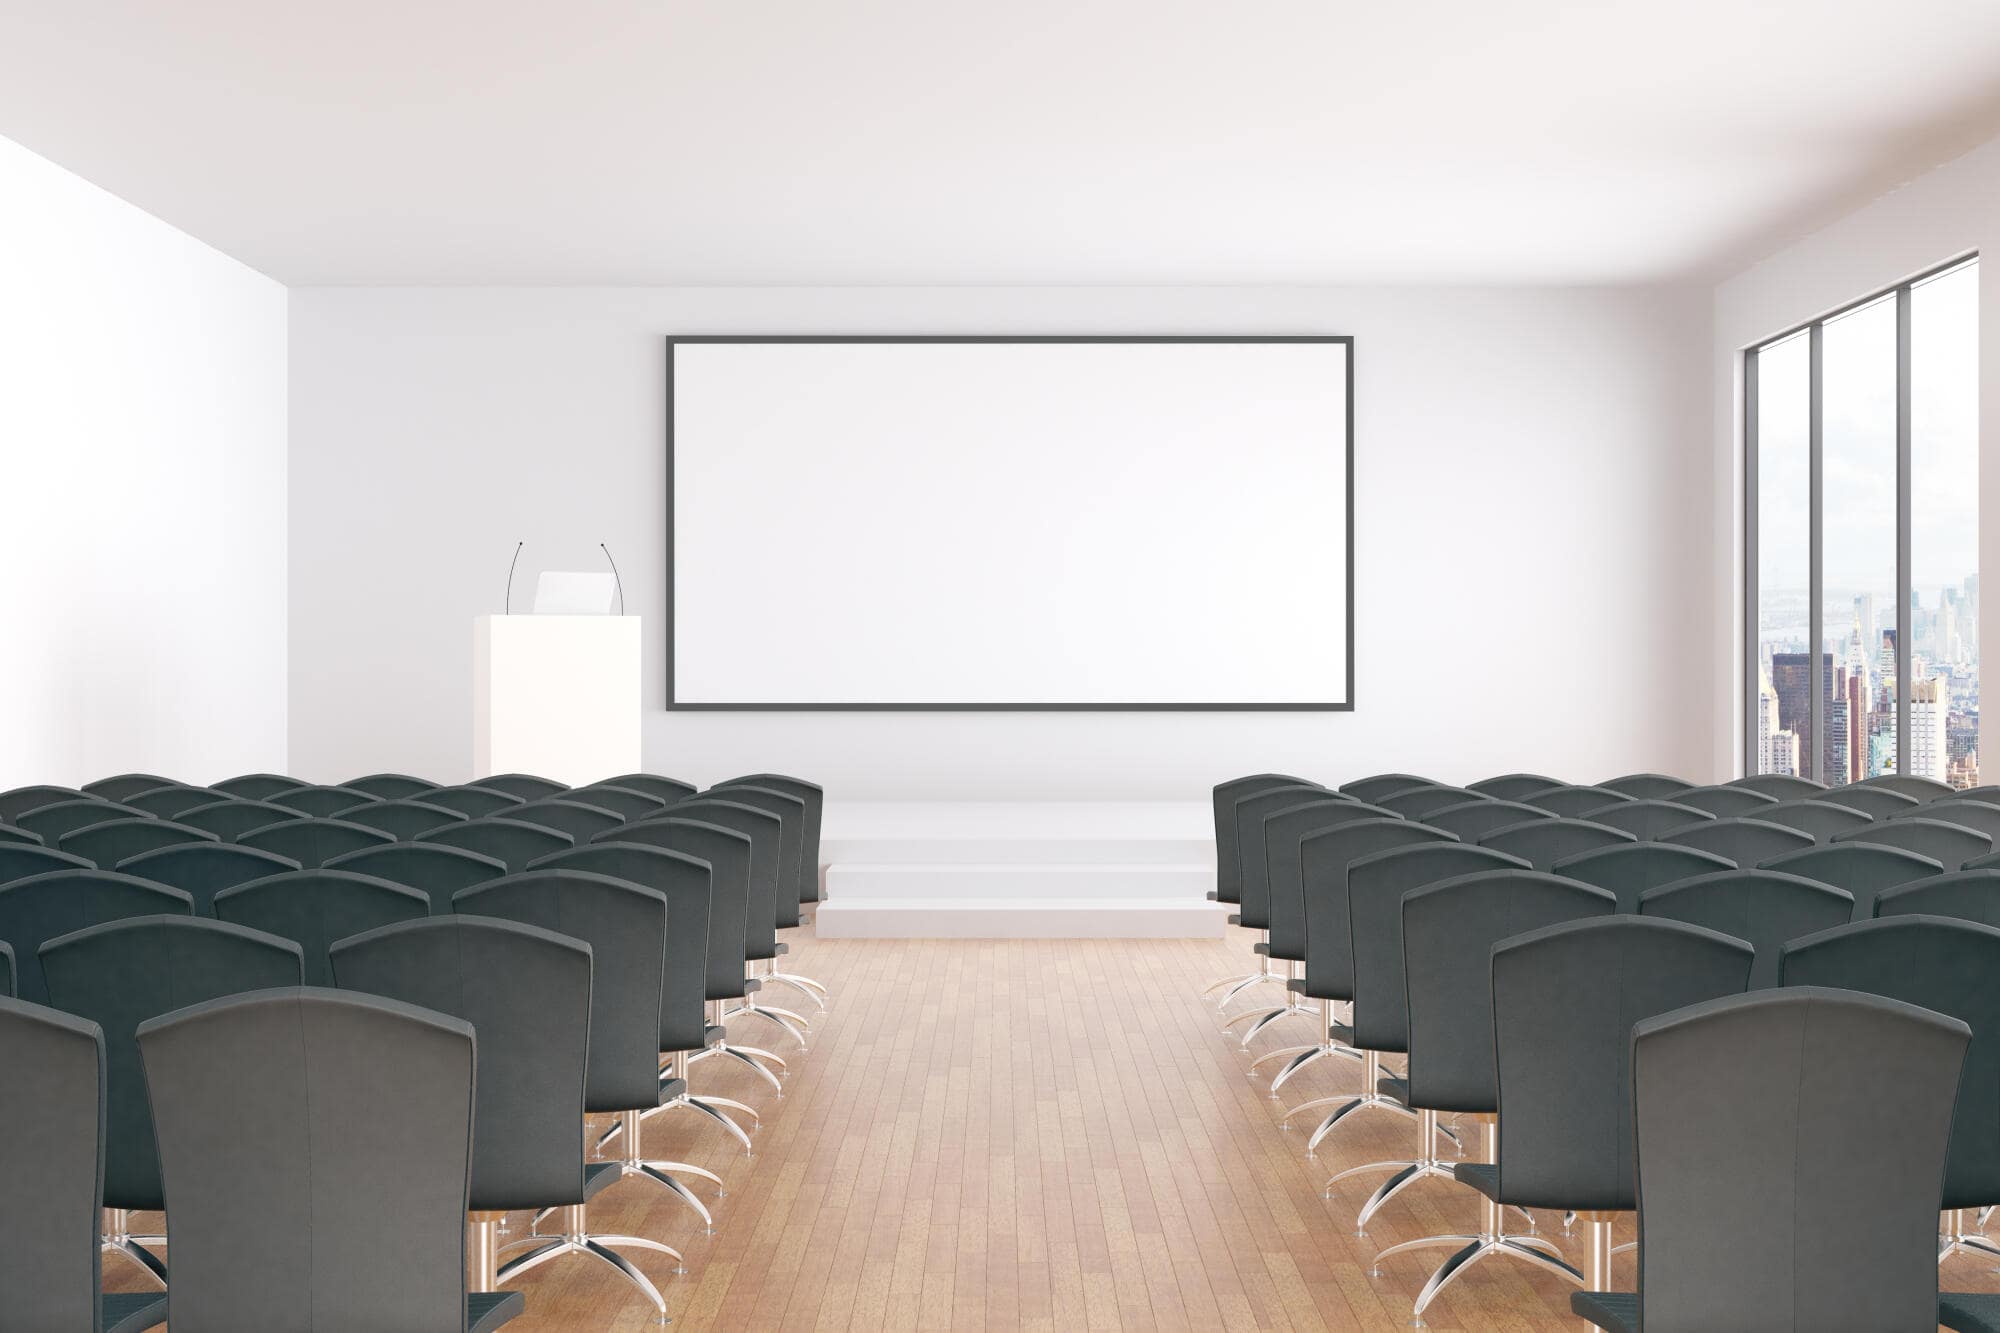 Maximizing Participation in HOA Meetings: A Guide for Board Members